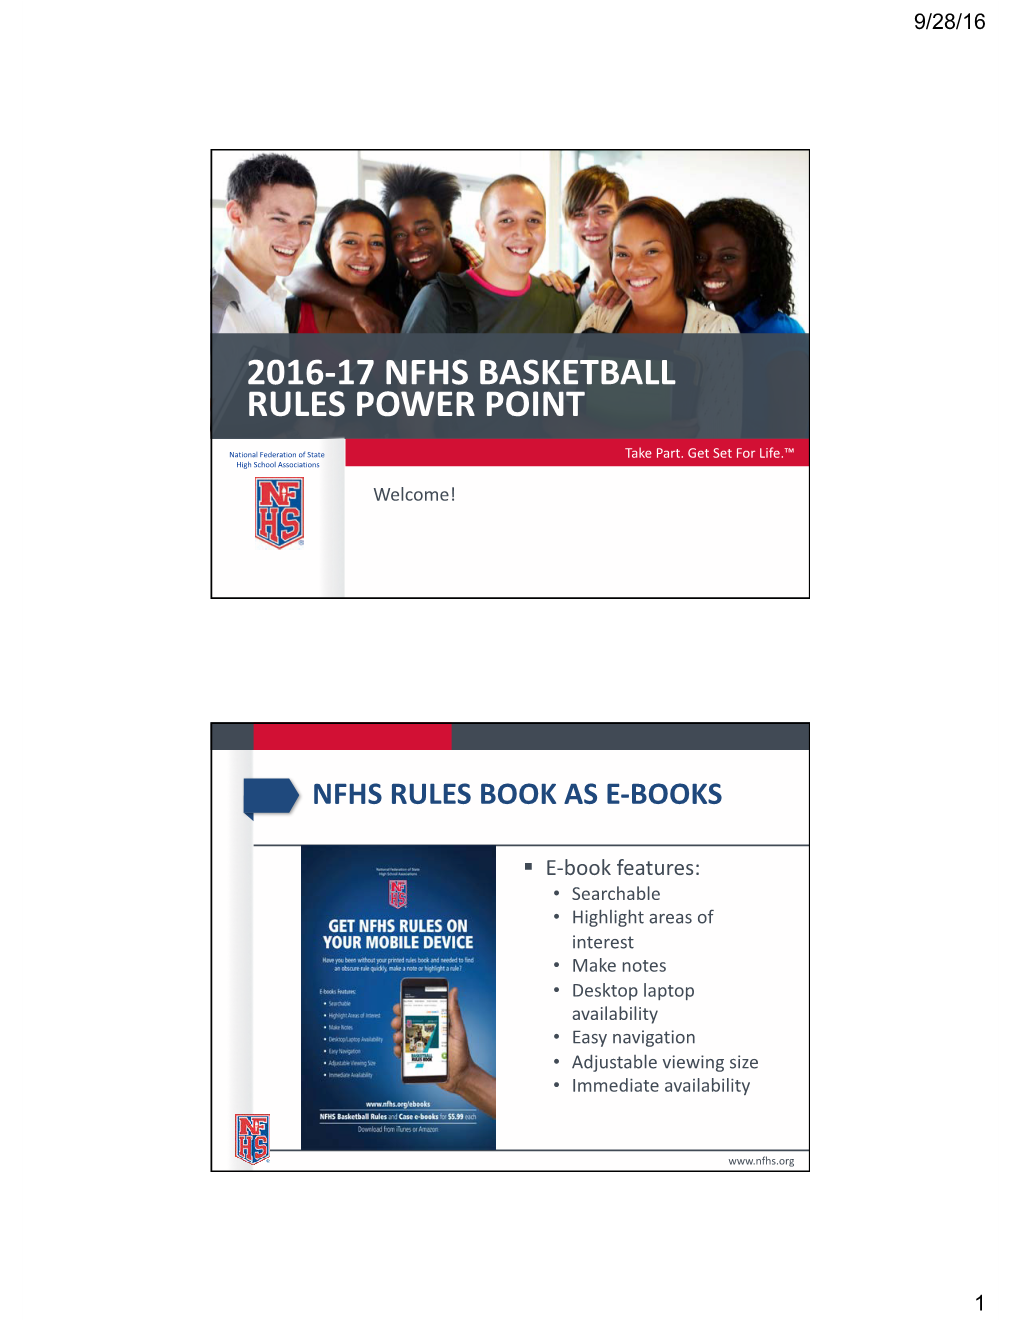 2016-17 Nfhs Basketball Rules Power Point